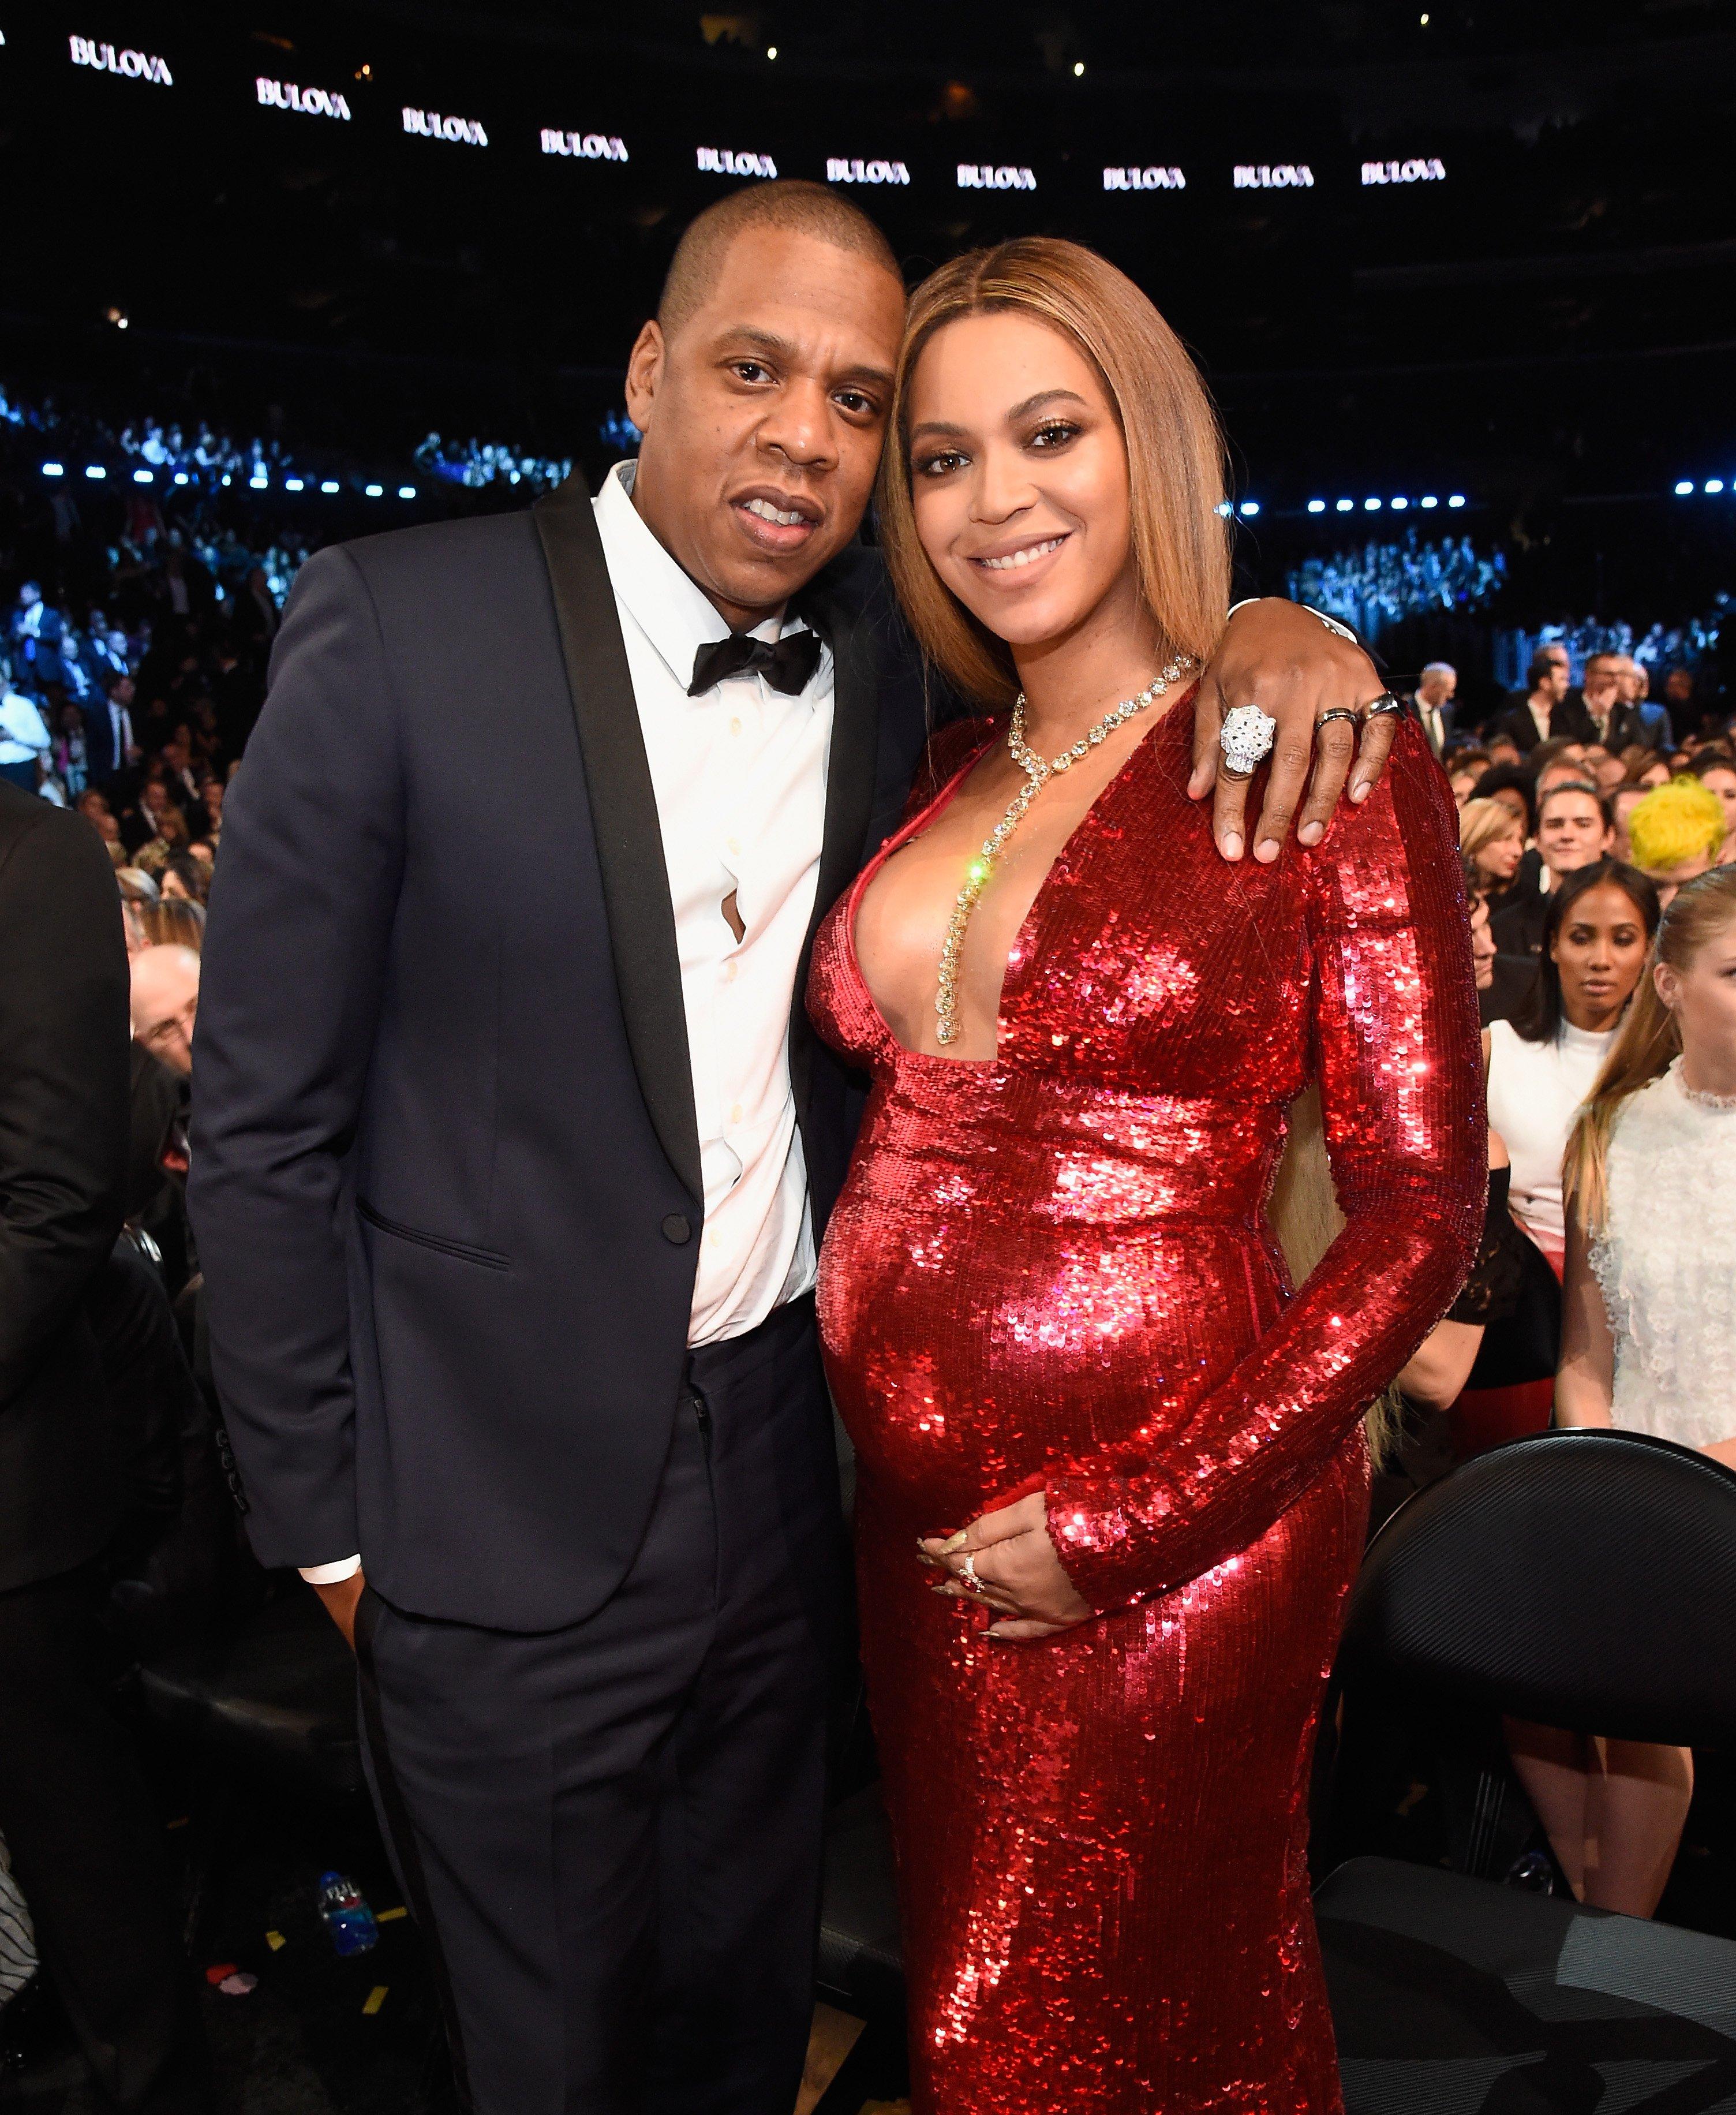 Jay-Z and Beyoncé at the 59th GRAMMY Awards